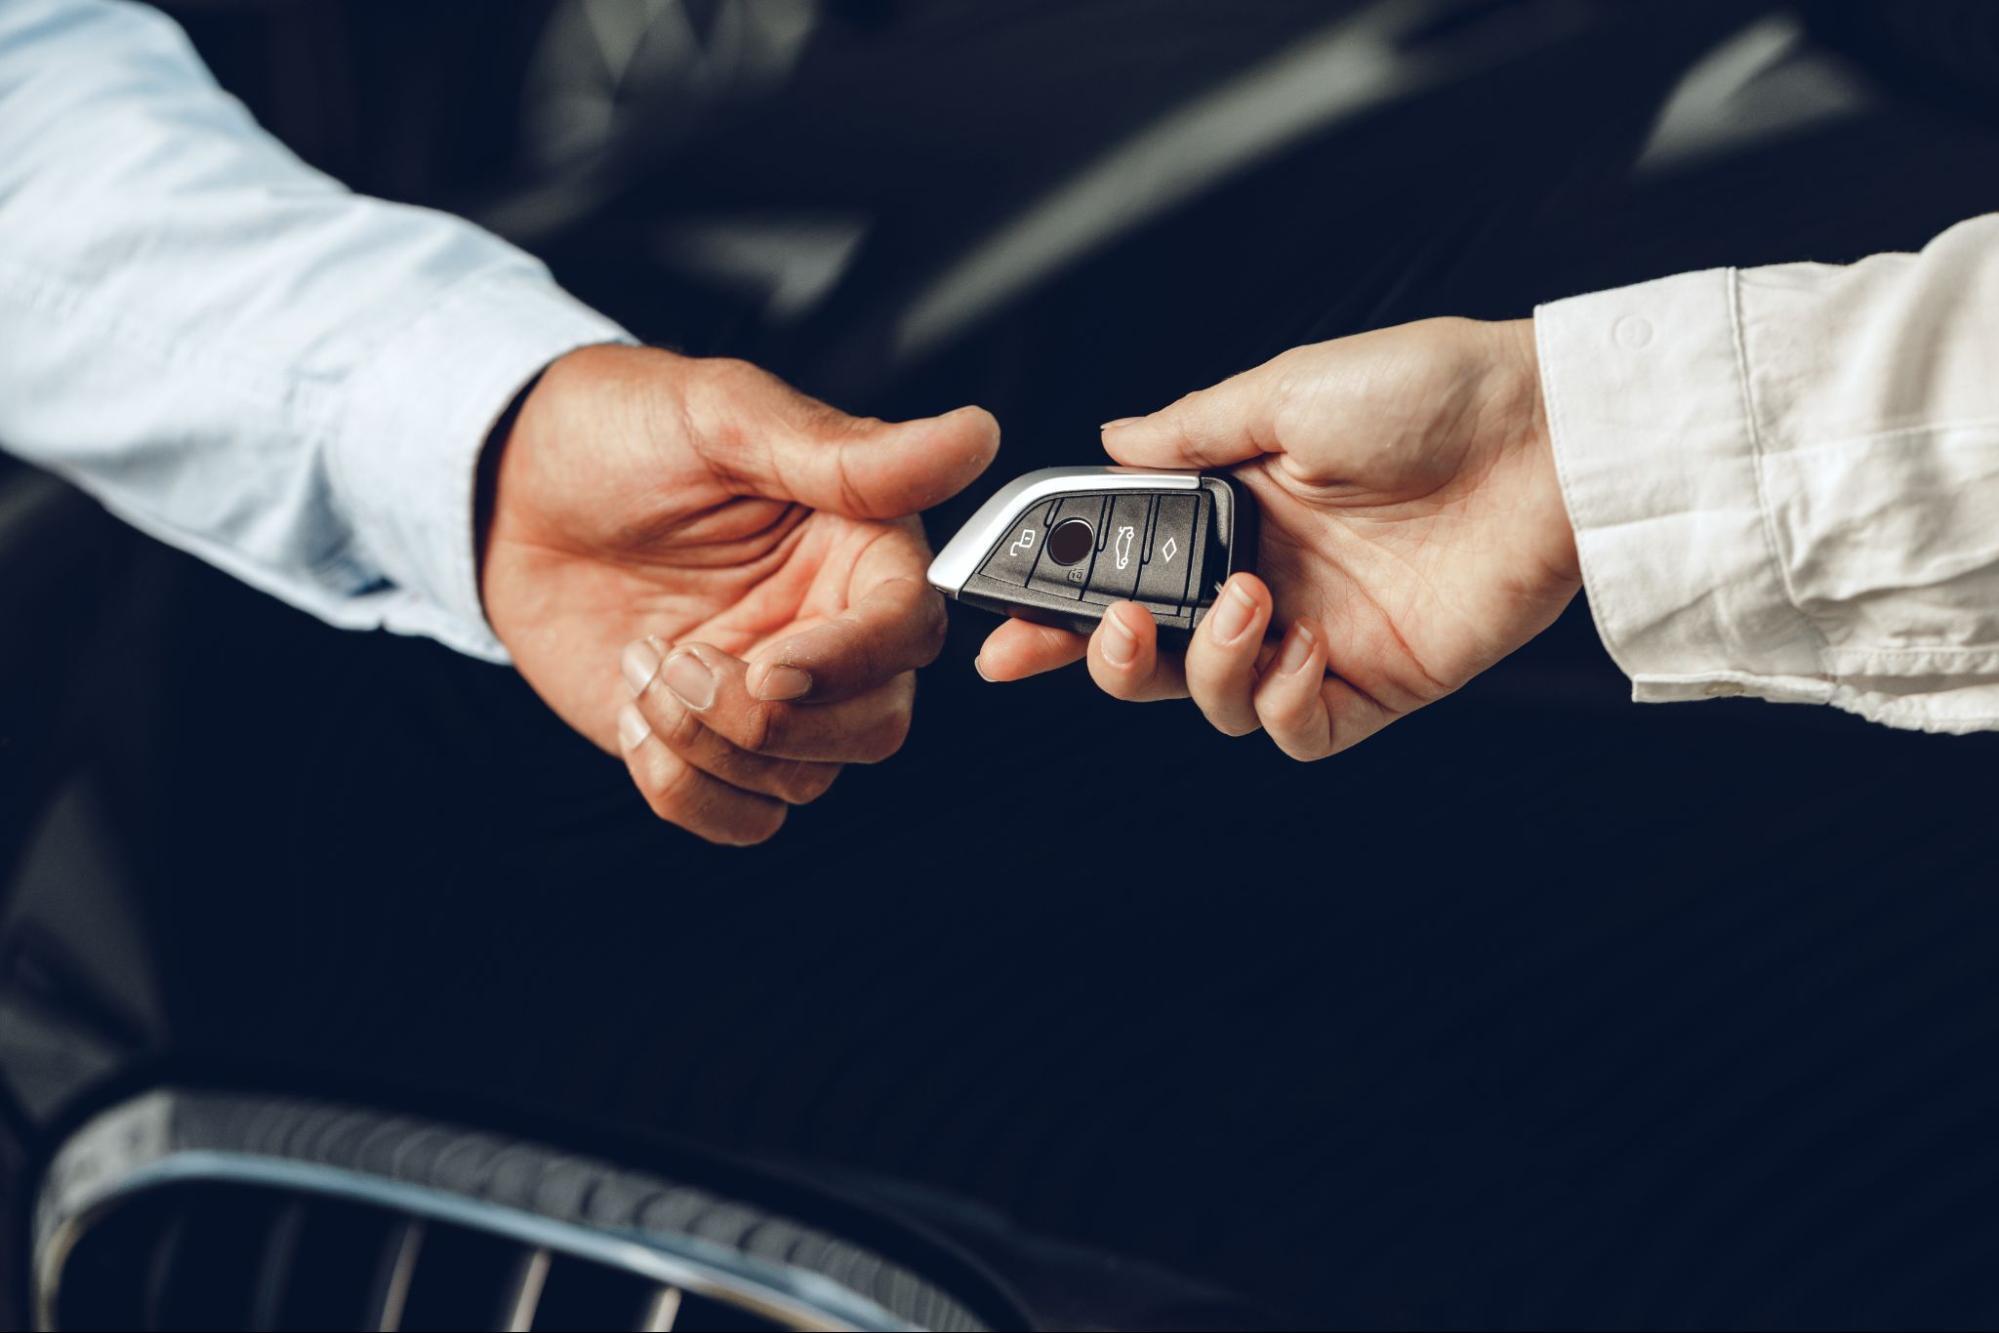 7 Easy and Safe Ways to Finance a Used Car